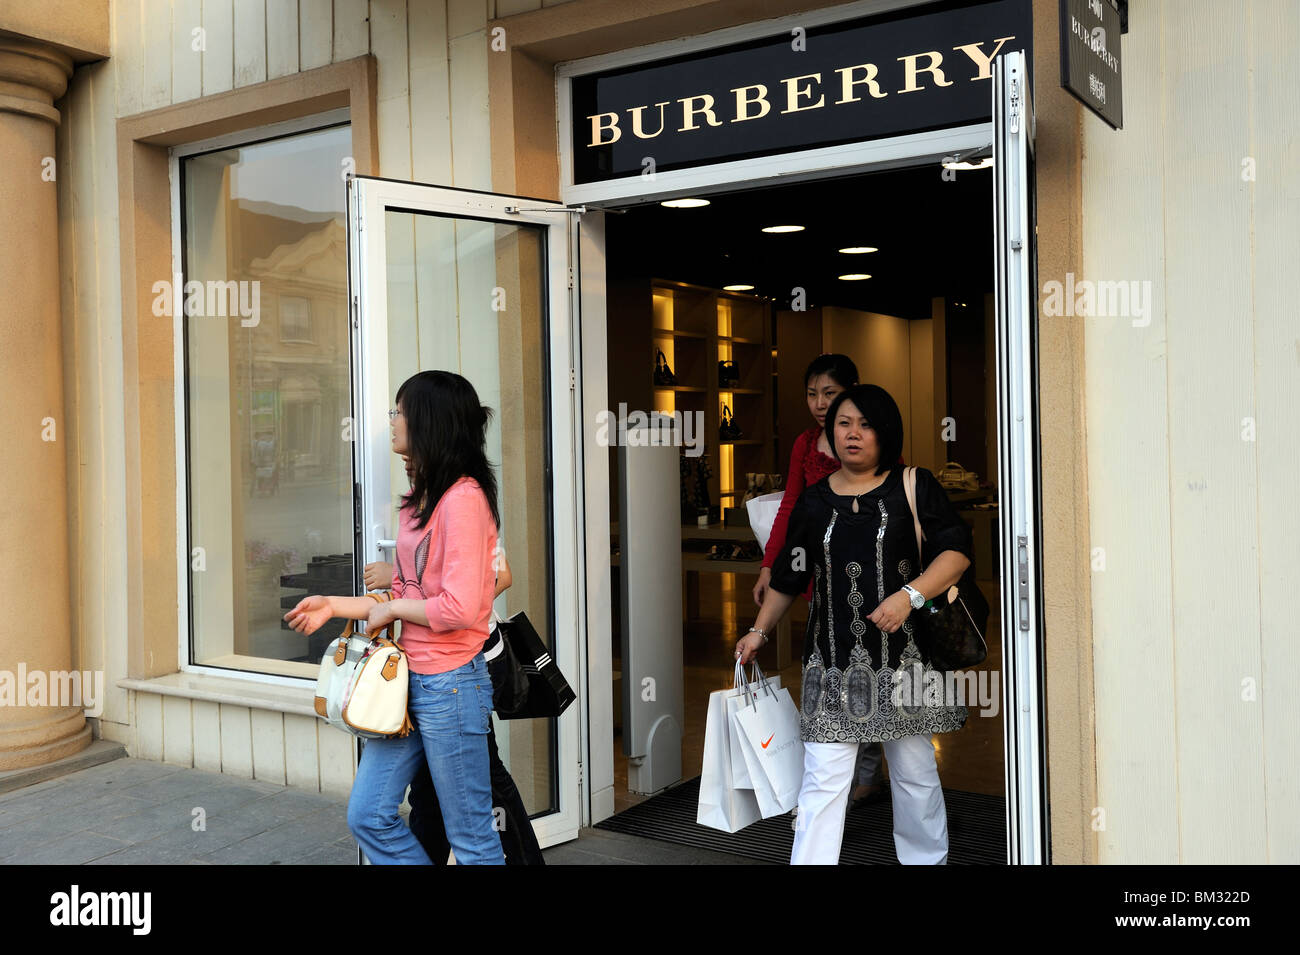 Parity Shop >>> burberry us website with a Reserve price 